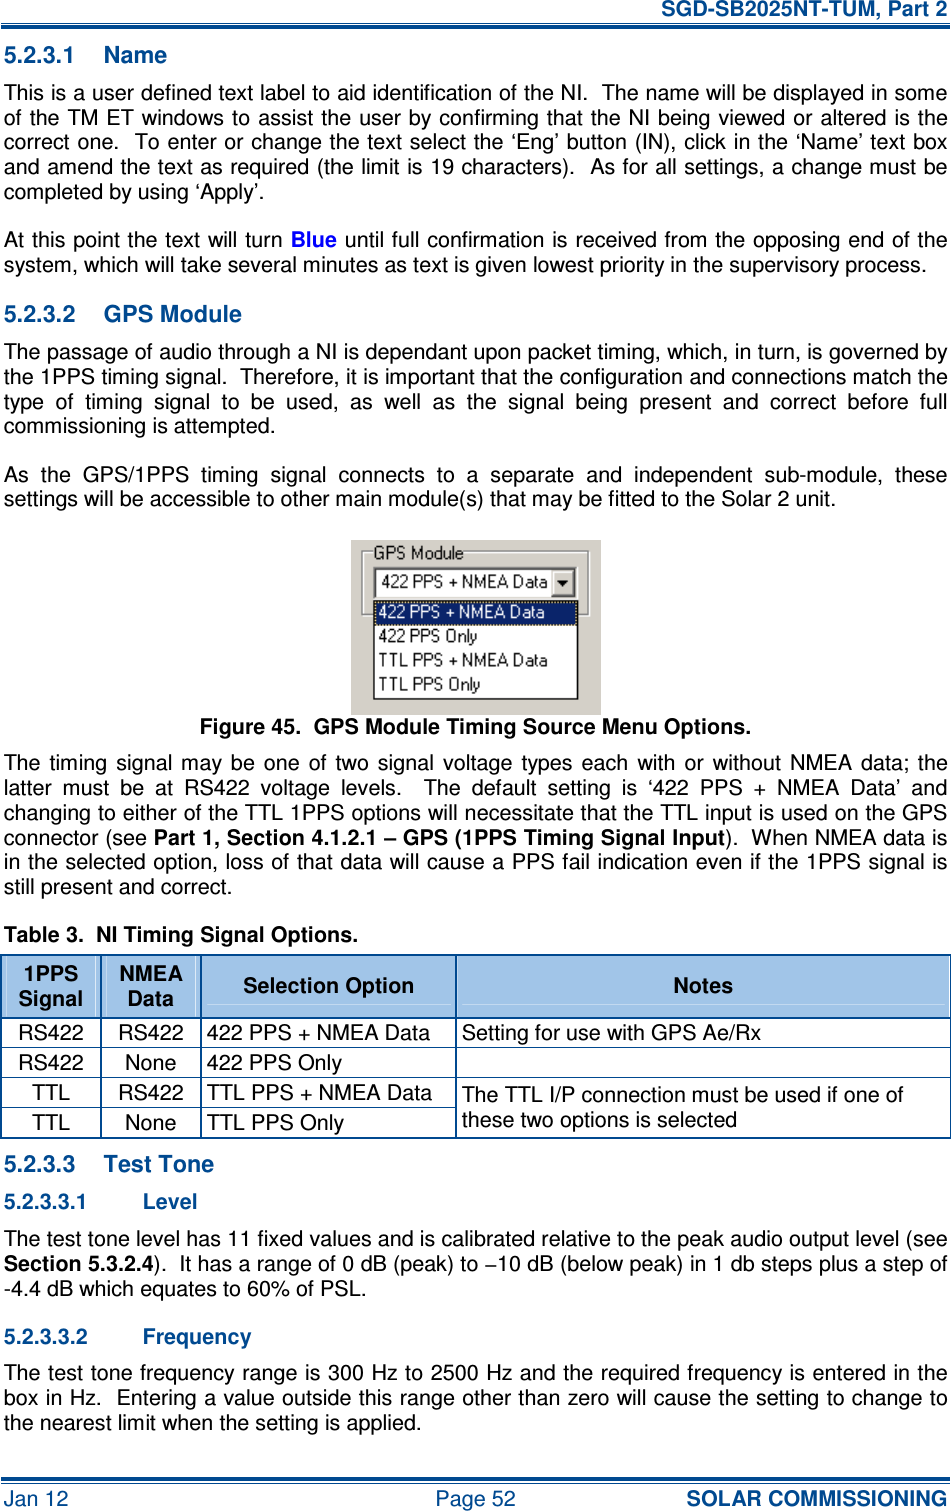   SGD-SB2025NT-TUM, Part 2 Jan 12  Page 52 SOLAR COMMISSIONING 5.2.3.1  Name This is a user defined text label to aid identification of the NI.  The name will be displayed in some of the TM ET windows to assist the user by confirming that the NI being viewed or altered is the correct one.  To enter or change the text select the ‘Eng’ button (IN), click in the ‘Name’ text box and amend the text as required (the limit is 19 characters).  As for all settings, a change must be completed by using ‘Apply’. At this point the text will turn Blue until full confirmation is received from the opposing end of the system, which will take several minutes as text is given lowest priority in the supervisory process. 5.2.3.2  GPS Module The passage of audio through a NI is dependant upon packet timing, which, in turn, is governed by the 1PPS timing signal.  Therefore, it is important that the configuration and connections match the type  of  timing  signal  to  be  used,  as  well  as  the  signal  being  present  and  correct  before  full commissioning is attempted. As  the  GPS/1PPS  timing  signal  connects  to  a  separate  and  independent  sub-module,  these settings will be accessible to other main module(s) that may be fitted to the Solar 2 unit. Figure 45.  GPS Module Timing Source Menu Options. The timing  signal  may  be  one  of  two  signal  voltage  types  each  with or  without  NMEA data;  the latter  must  be  at  RS422  voltage  levels.    The  default  setting  is  ‘422  PPS  +  NMEA  Data’  and changing to either of the TTL 1PPS options will necessitate that the TTL input is used on the GPS connector (see Part 1, Section 4.1.2.1 – GPS (1PPS Timing Signal Input).  When NMEA data is in the selected option, loss of that data will cause a PPS fail indication even if the 1PPS signal is still present and correct. Table 3.  NI Timing Signal Options. 1PPS Signal NMEA Data  Selection Option  Notes RS422  RS422  422 PPS + NMEA Data  Setting for use with GPS Ae/Rx RS422  None  422 PPS Only   TTL  RS422  TTL PPS + NMEA Data TTL  None  TTL PPS Only The TTL I/P connection must be used if one of these two options is selected 5.2.3.3  Test Tone 5.2.3.3.1  Level The test tone level has 11 fixed values and is calibrated relative to the peak audio output level (see Section 5.3.2.4).  It has a range of 0 dB (peak) to −10 dB (below peak) in 1 db steps plus a step of -4.4 dB which equates to 60% of PSL. 5.2.3.3.2  Frequency The test tone frequency range is 300 Hz to 2500 Hz and the required frequency is entered in the box in Hz.  Entering a value outside this range other than zero will cause the setting to change to the nearest limit when the setting is applied. 